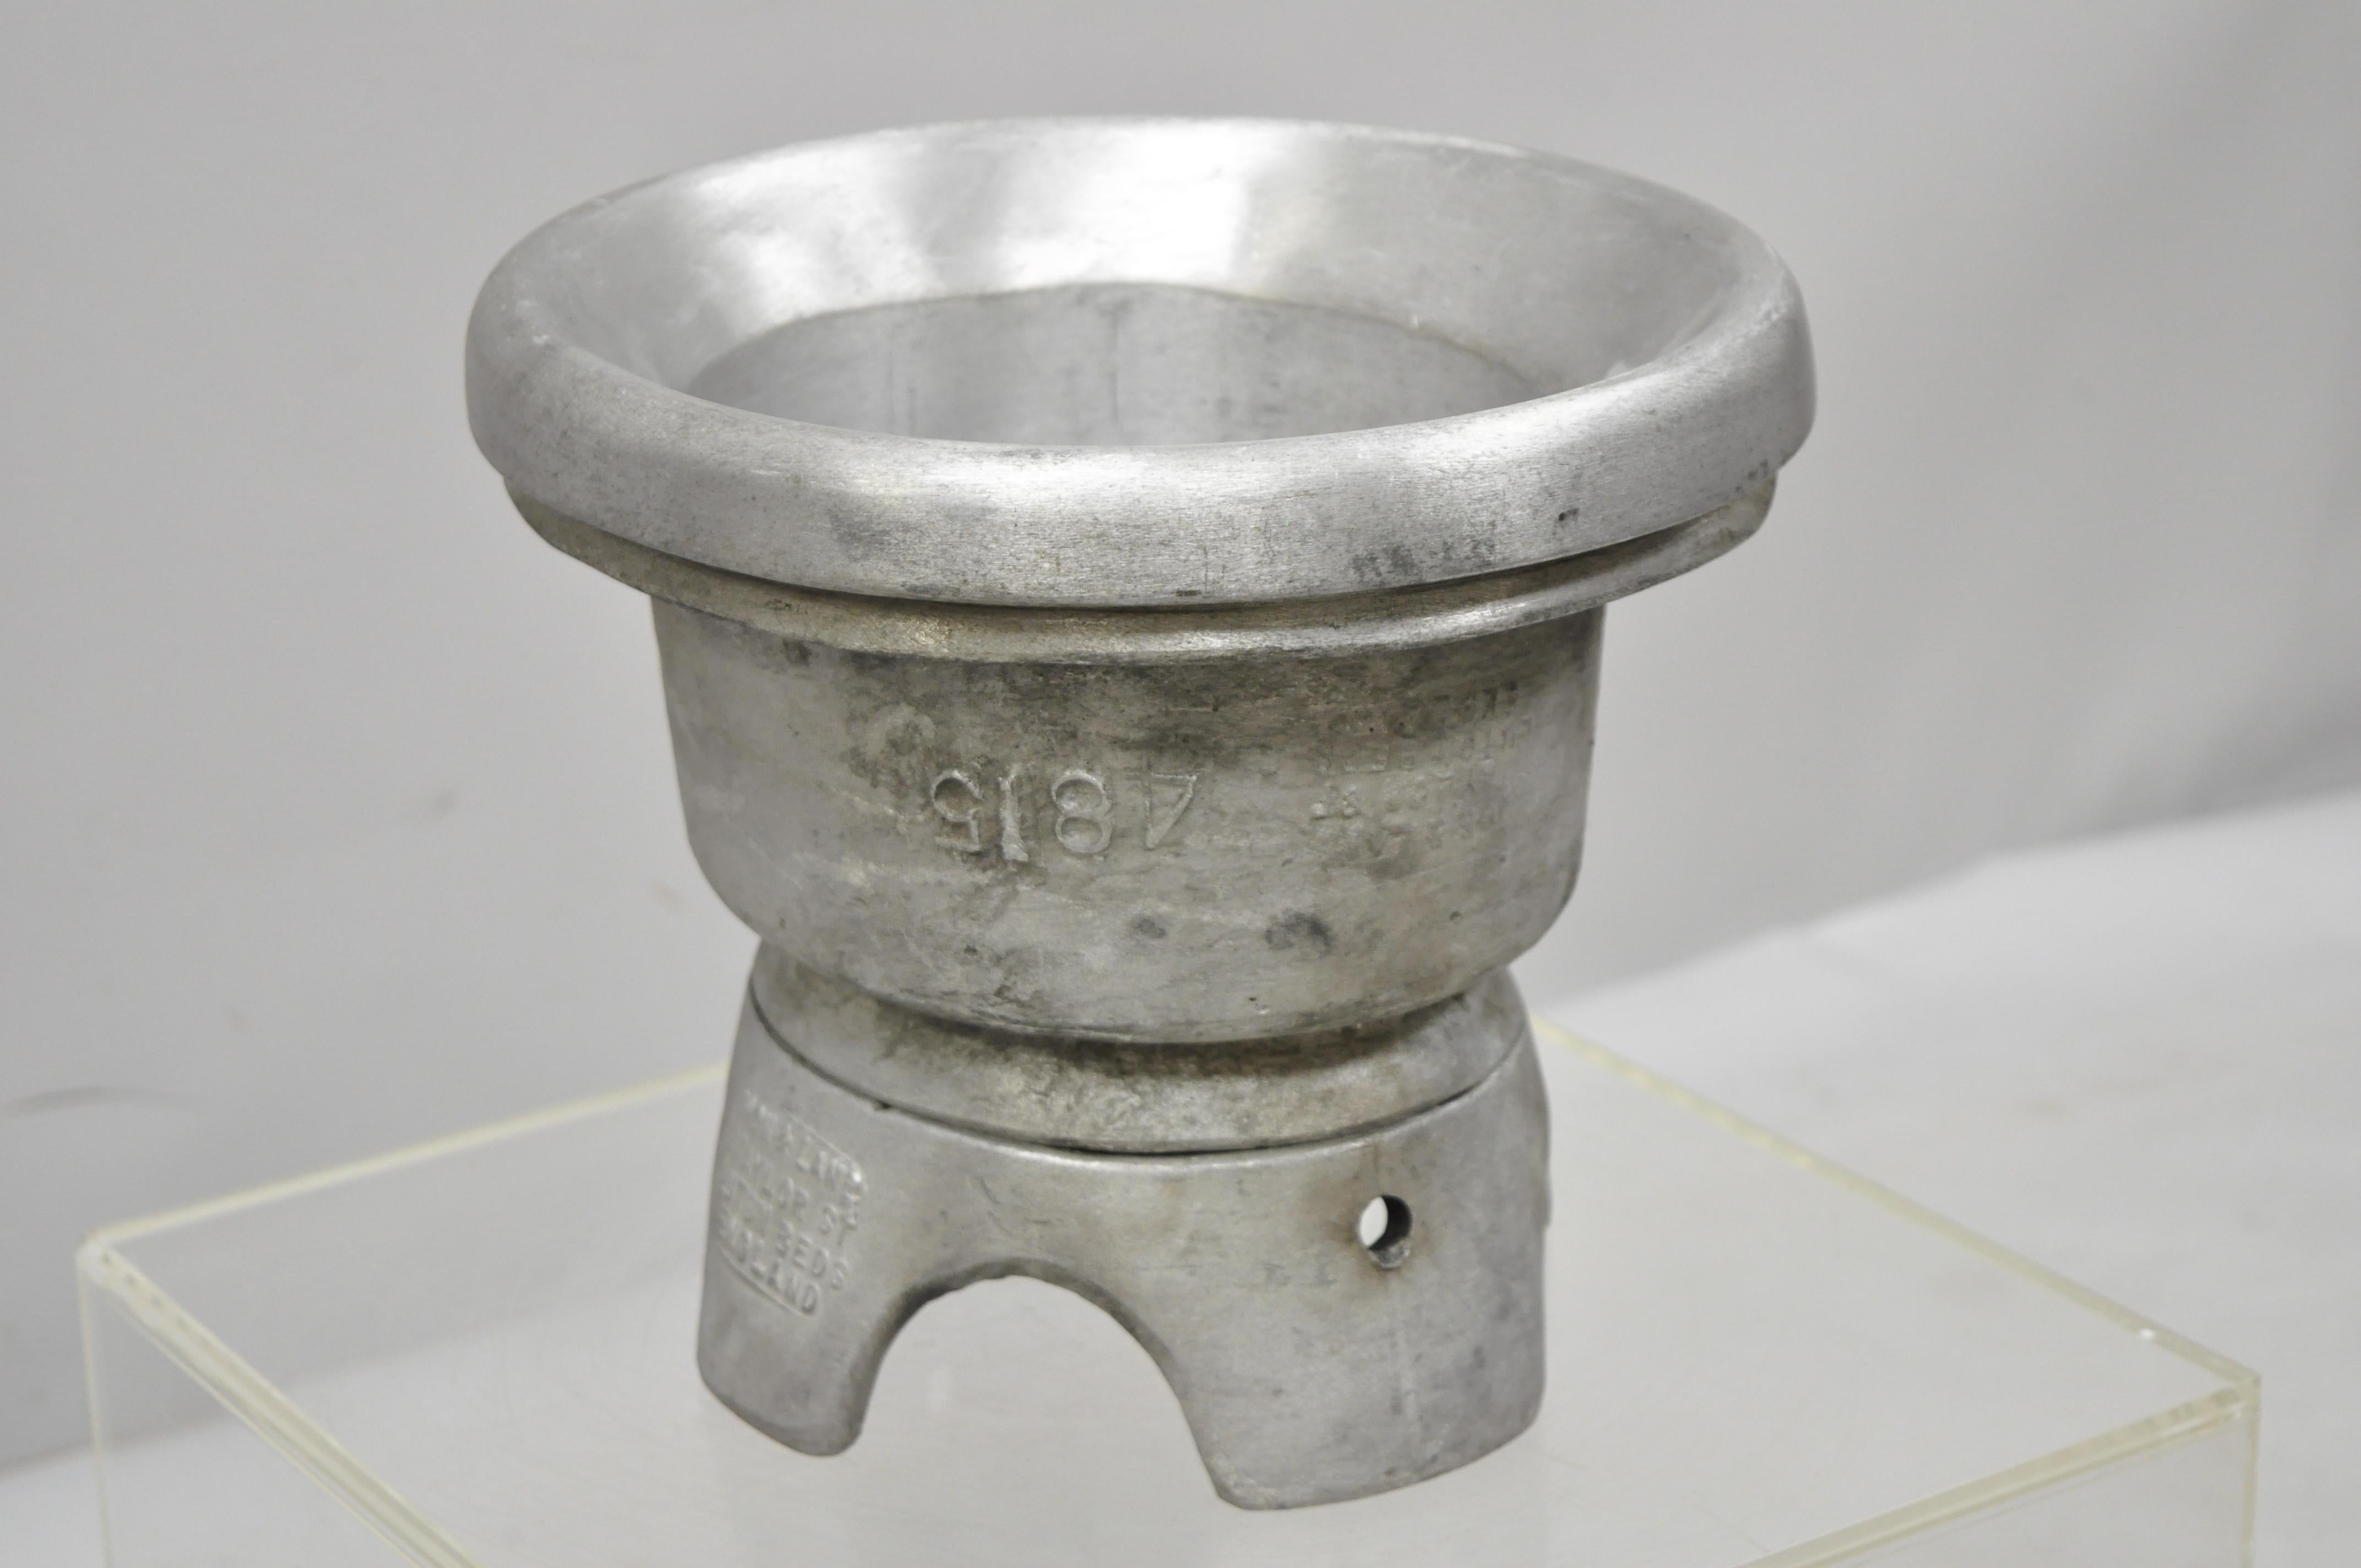 Vintage Boon & Lane aluminum hat block mold form millinery, Luton Beds, England (A) listing is for (1) hat mold as pictured, circa mid-20th century. Measurements: 11